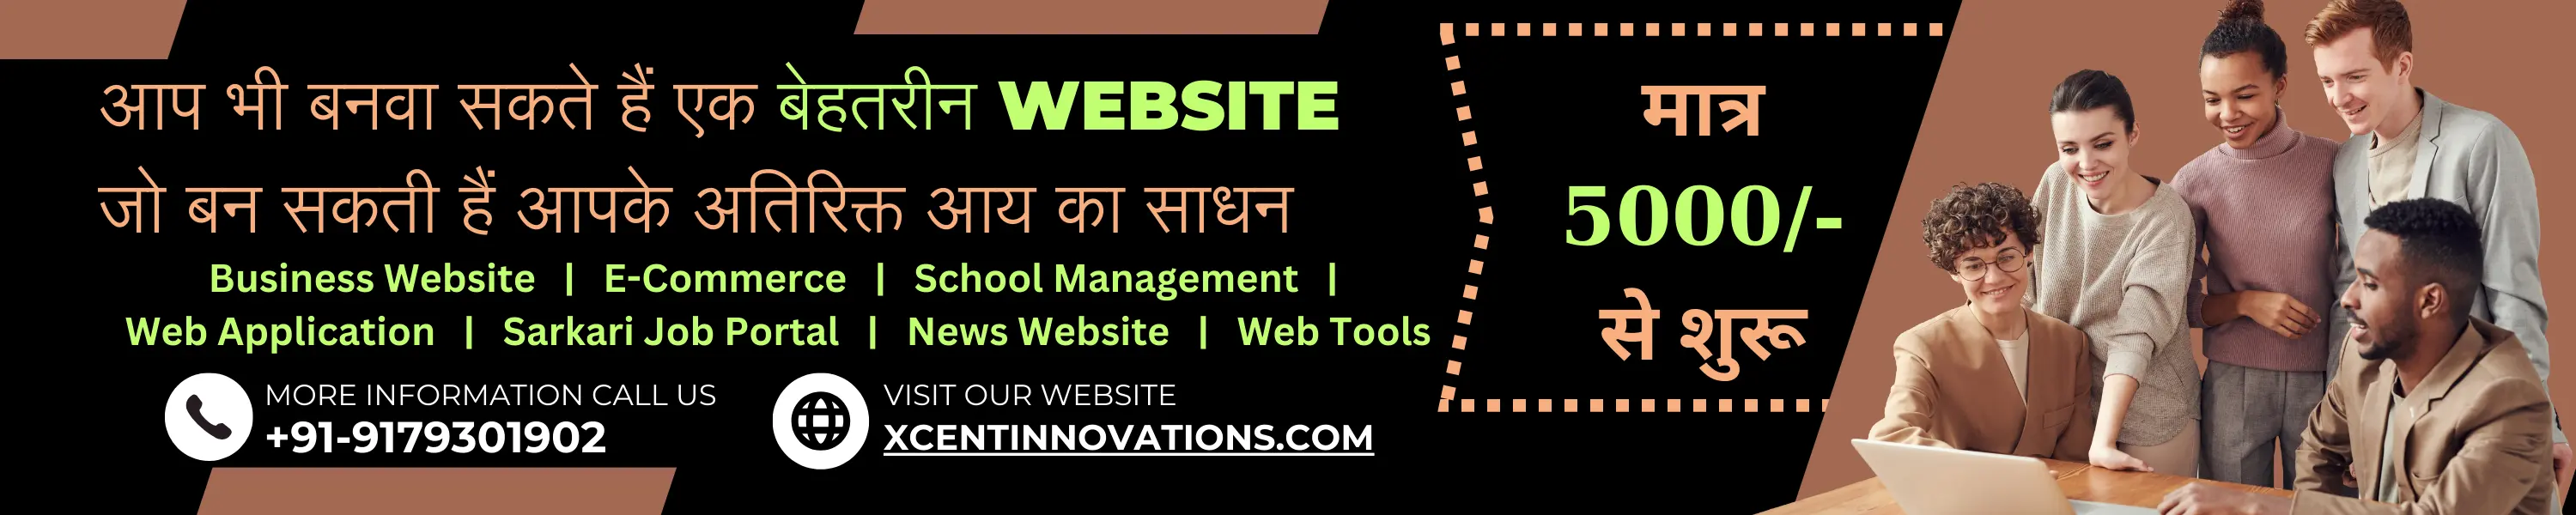 Get Stunning Website in just Rs. 5000 only